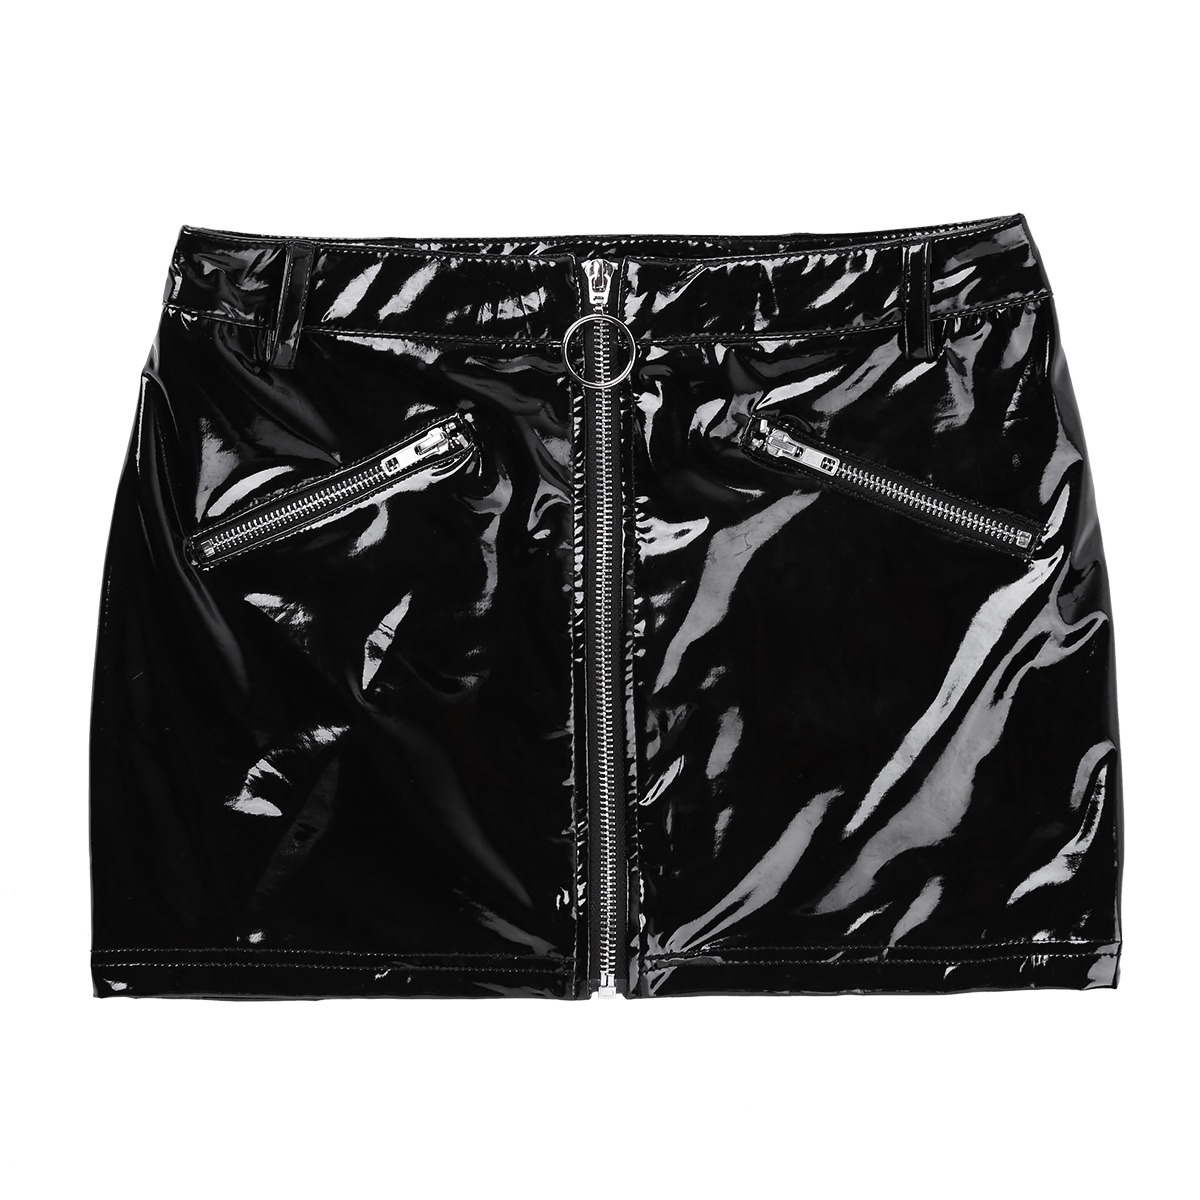 Zip Front Bodycon Mini Skirt with Pockets / Women's Sexy Wetlook Outfits in Black and Leopard Colors - EVE's SECRETS